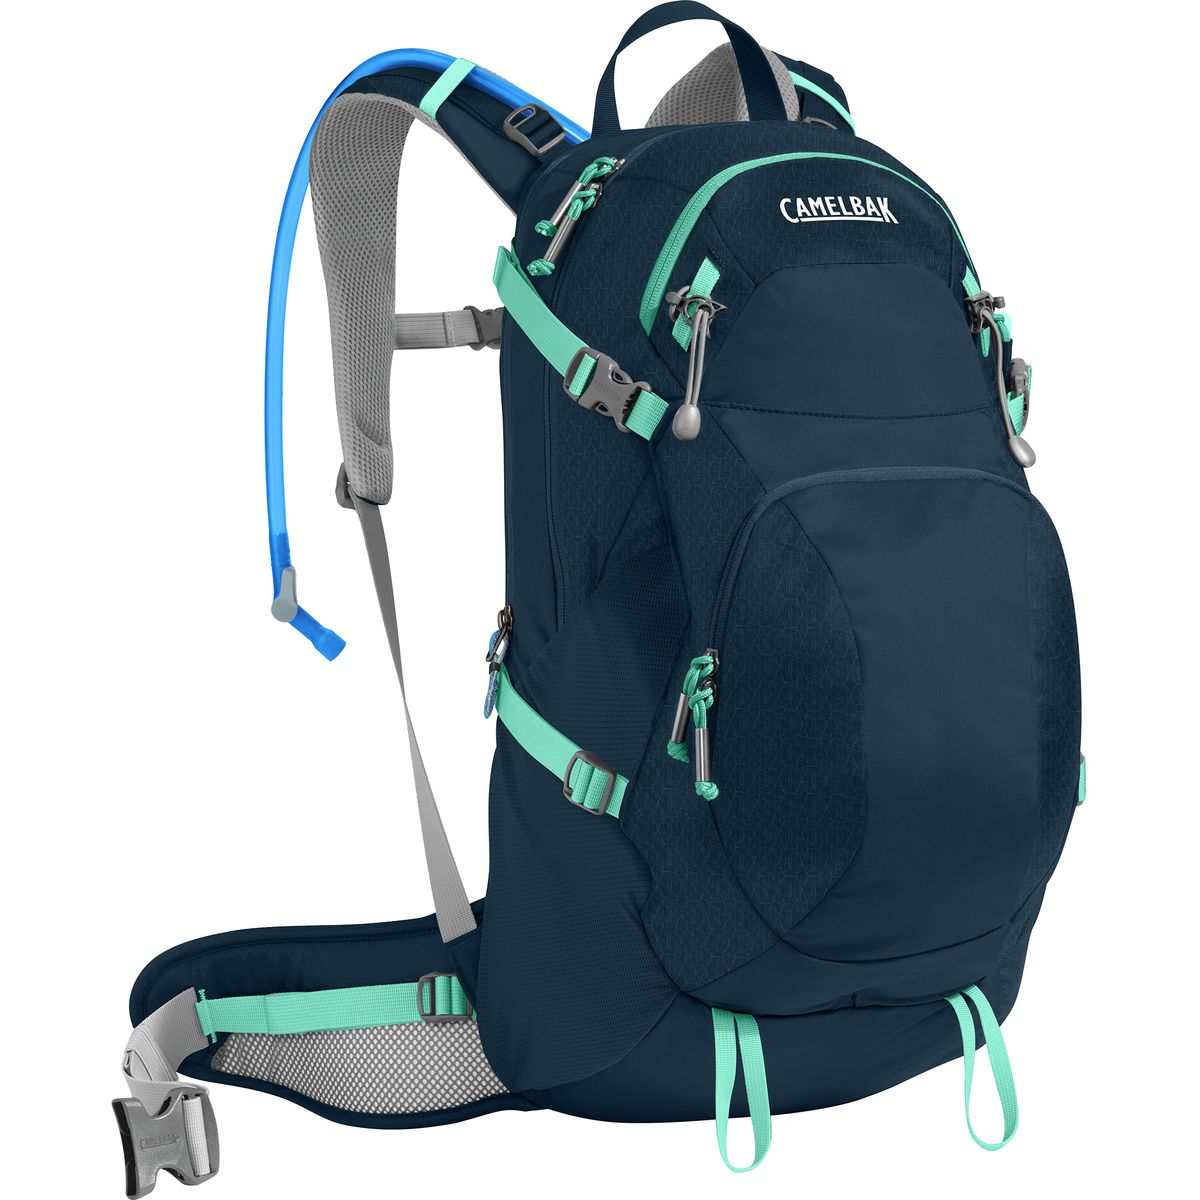 CamelBak Sequoia 22 Hydration Backpack 1343cu in Womens